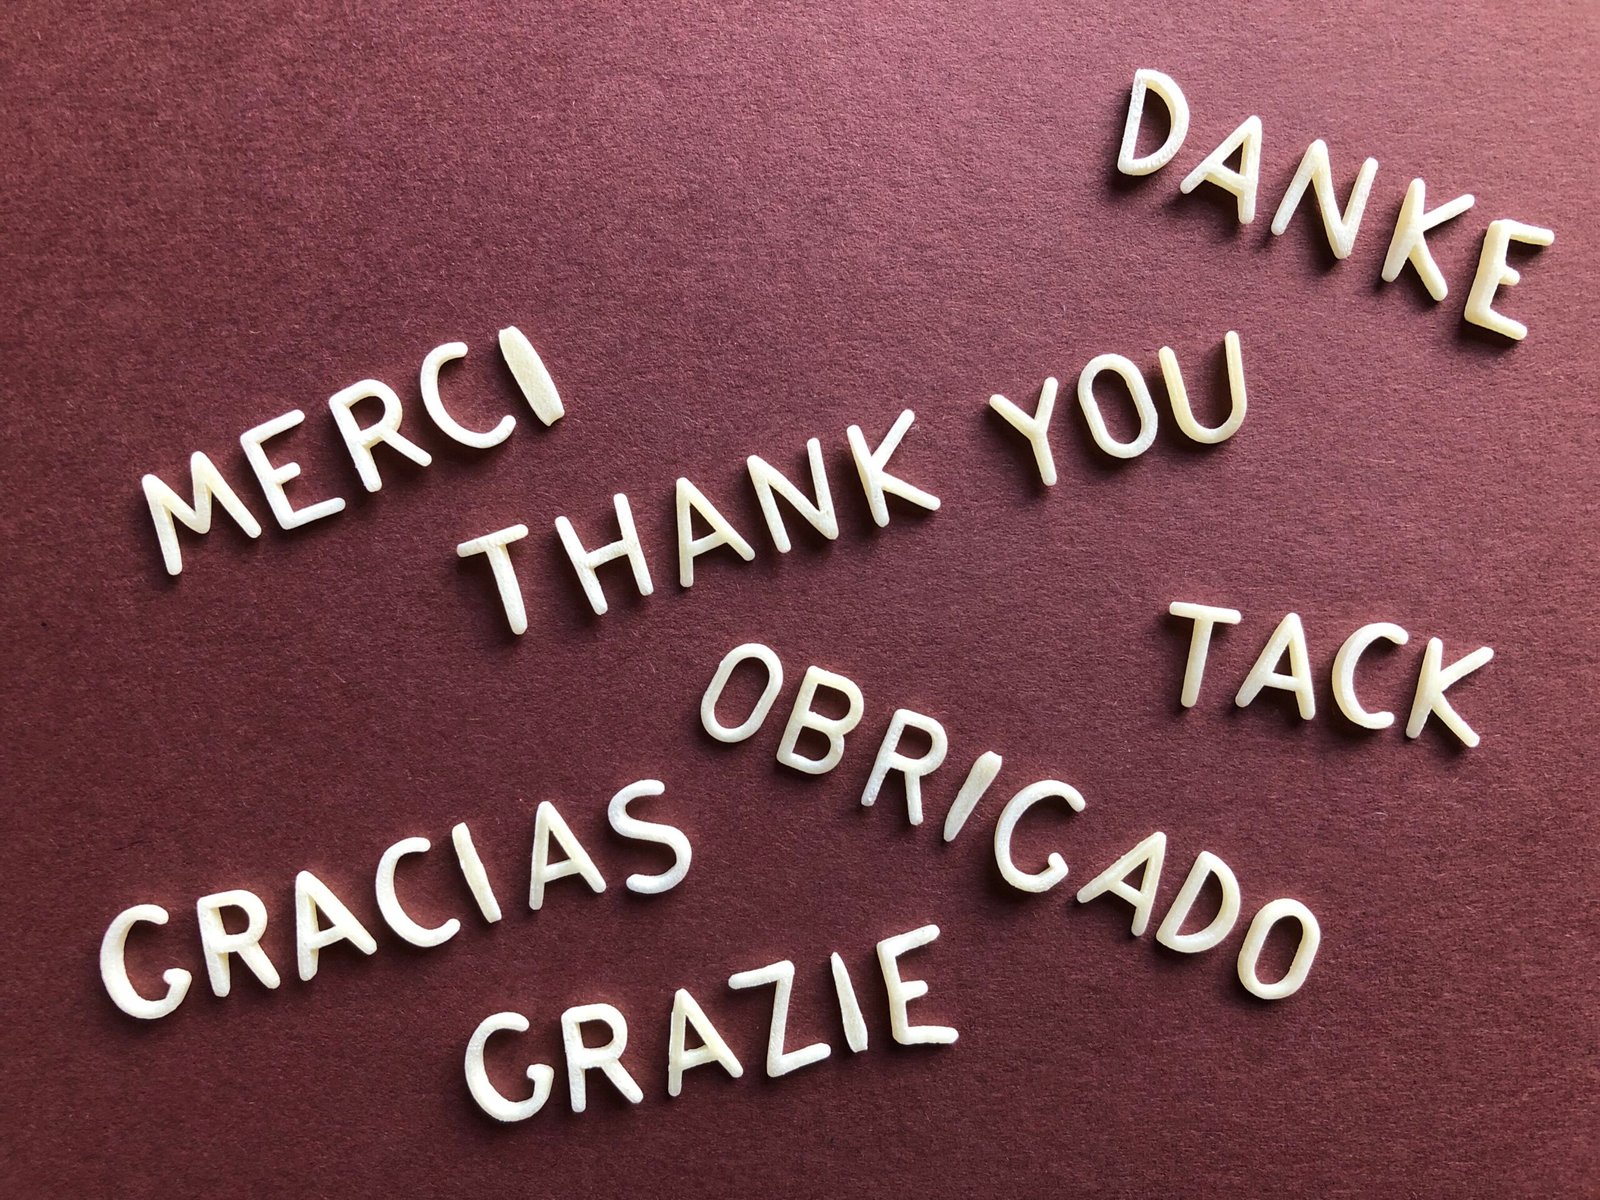 thank-you-words-in-different-european-languages-2022-11-15-15-03-07-utc